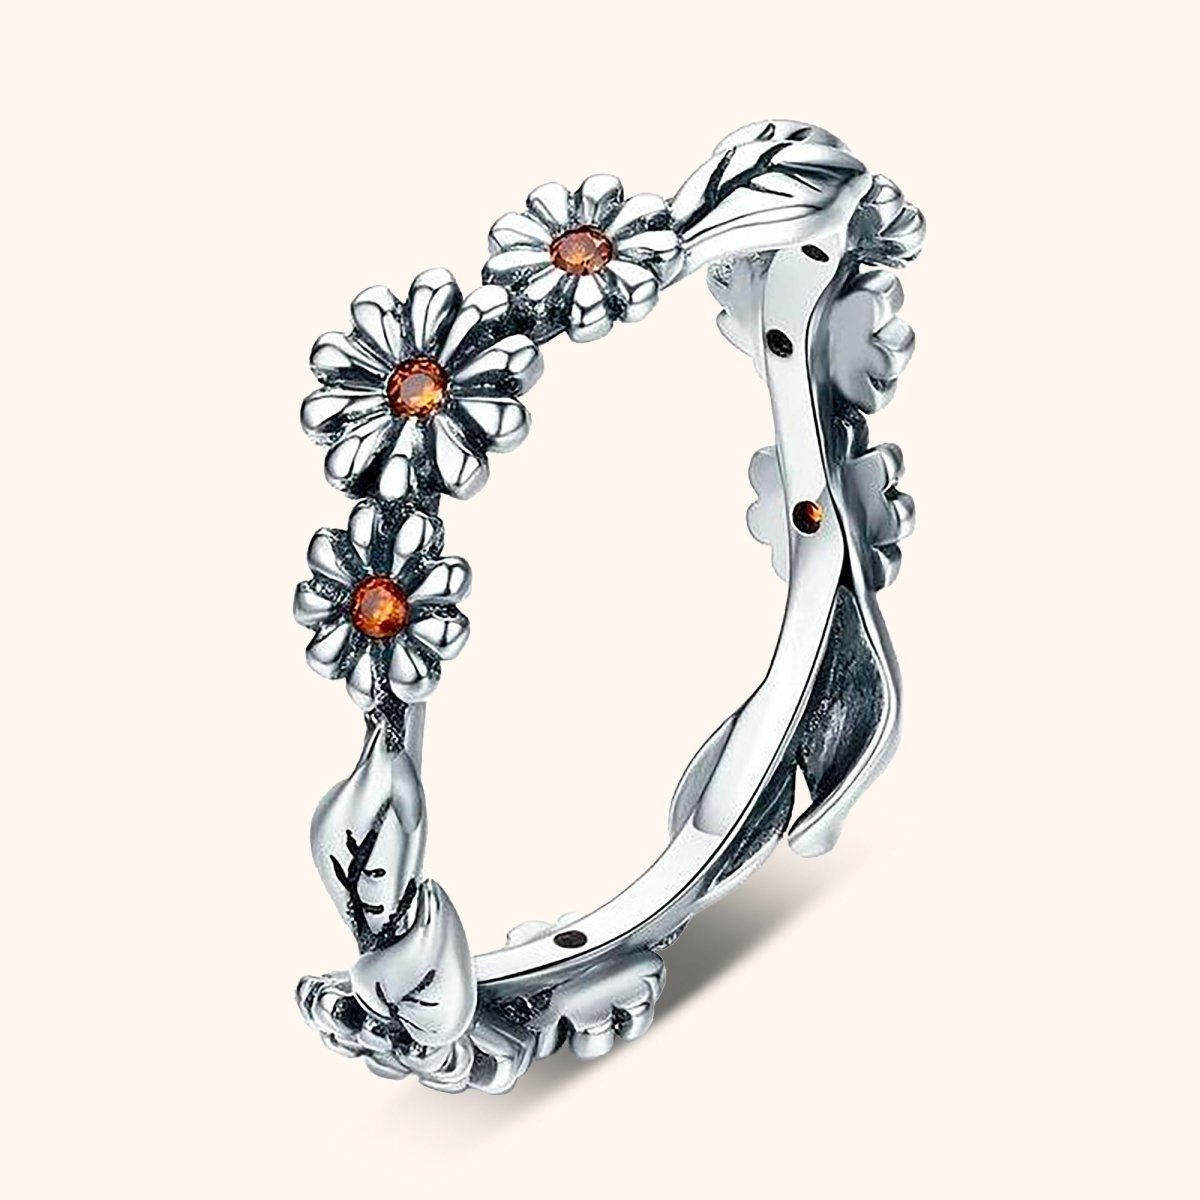 "Daisy Flower" Ring - Milas Jewels Shop